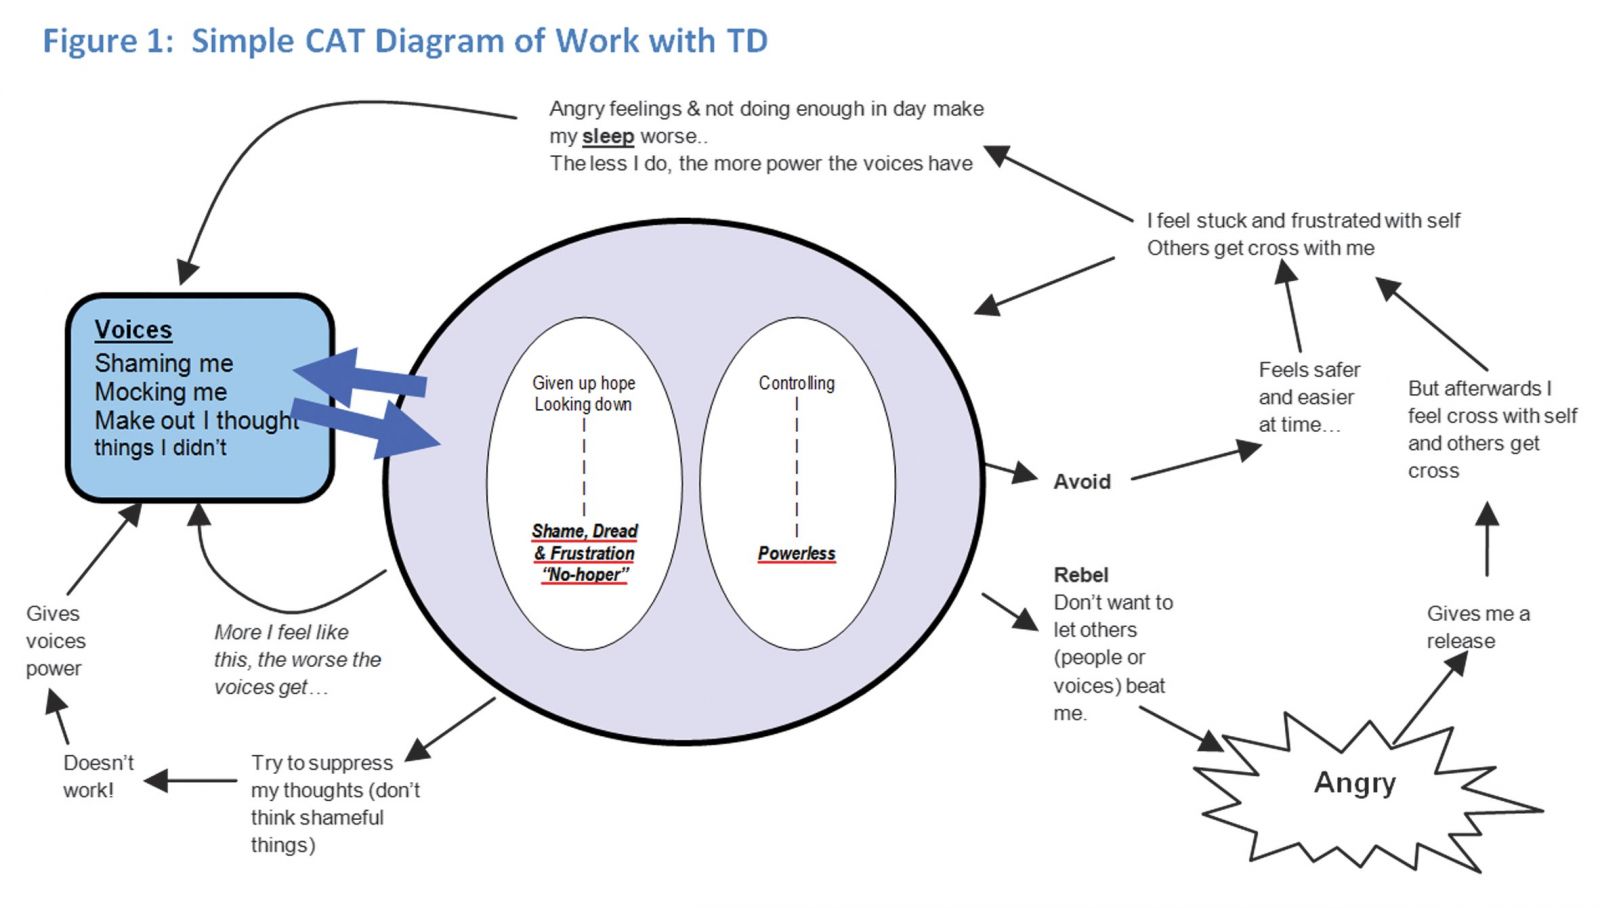 Simple CAT Diagram of work with TD